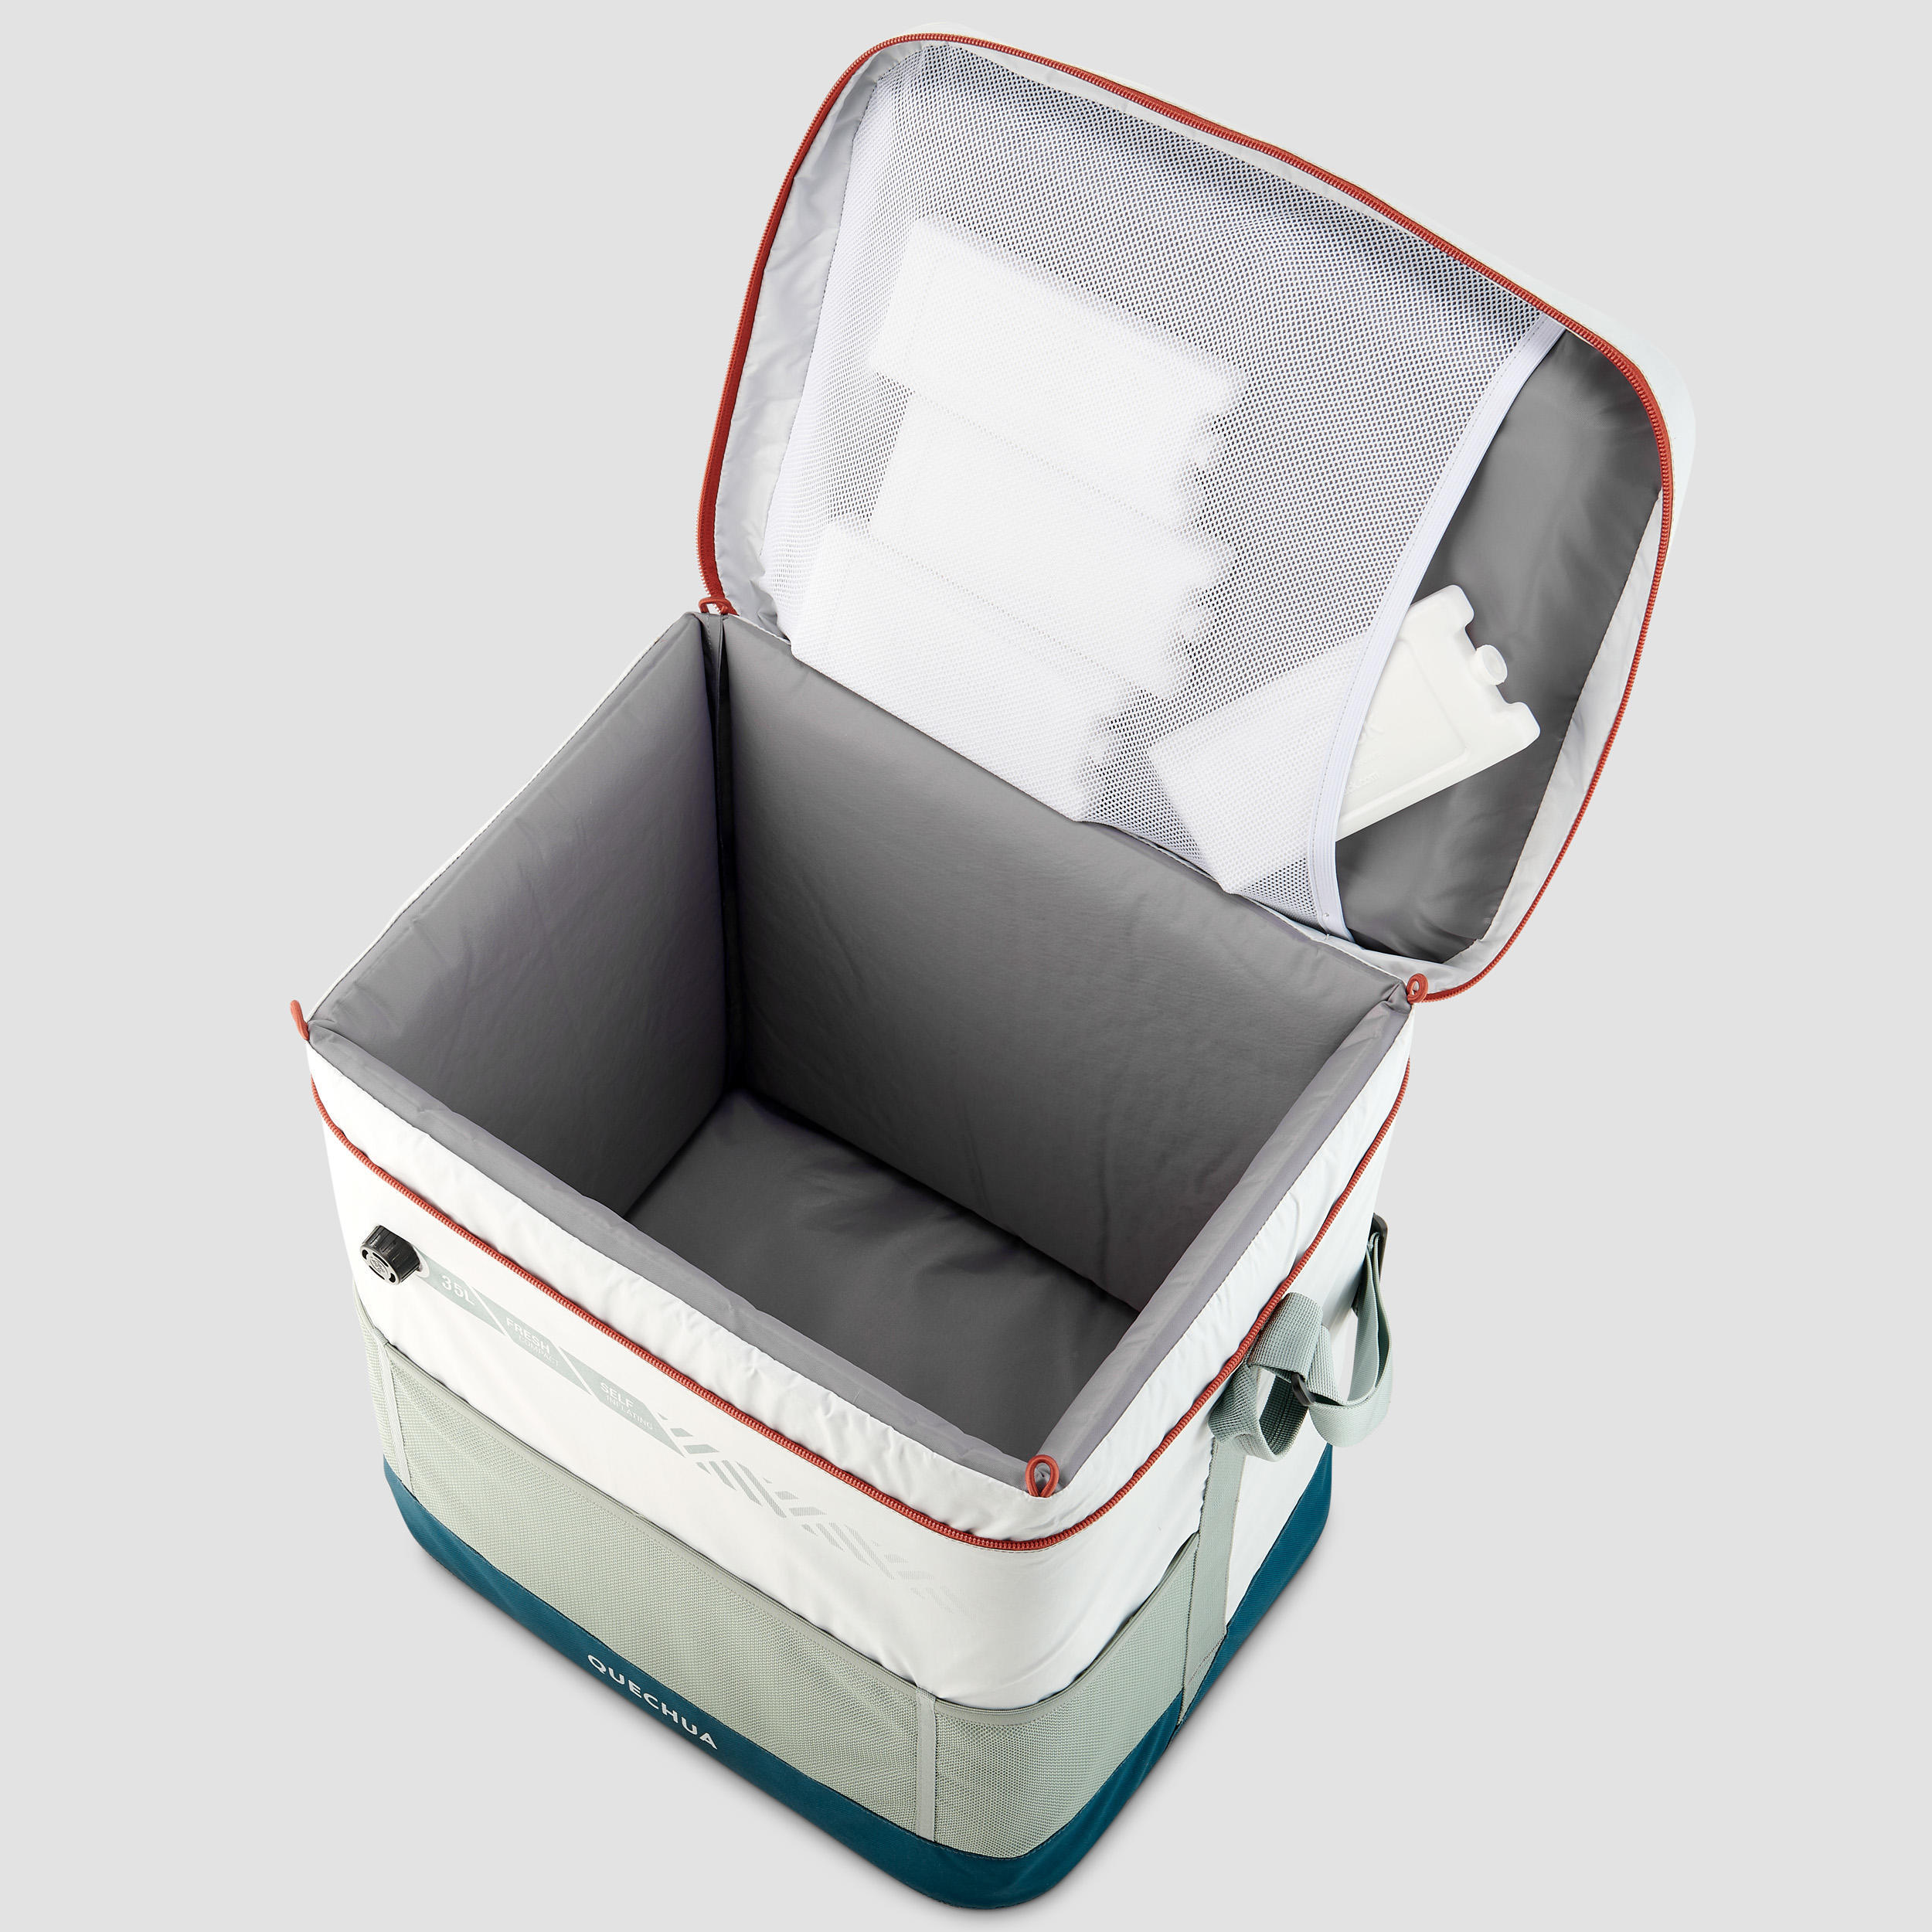 Camping Flexible Cooler - 35 L - Preserves Cold for 17 Hours 6/11